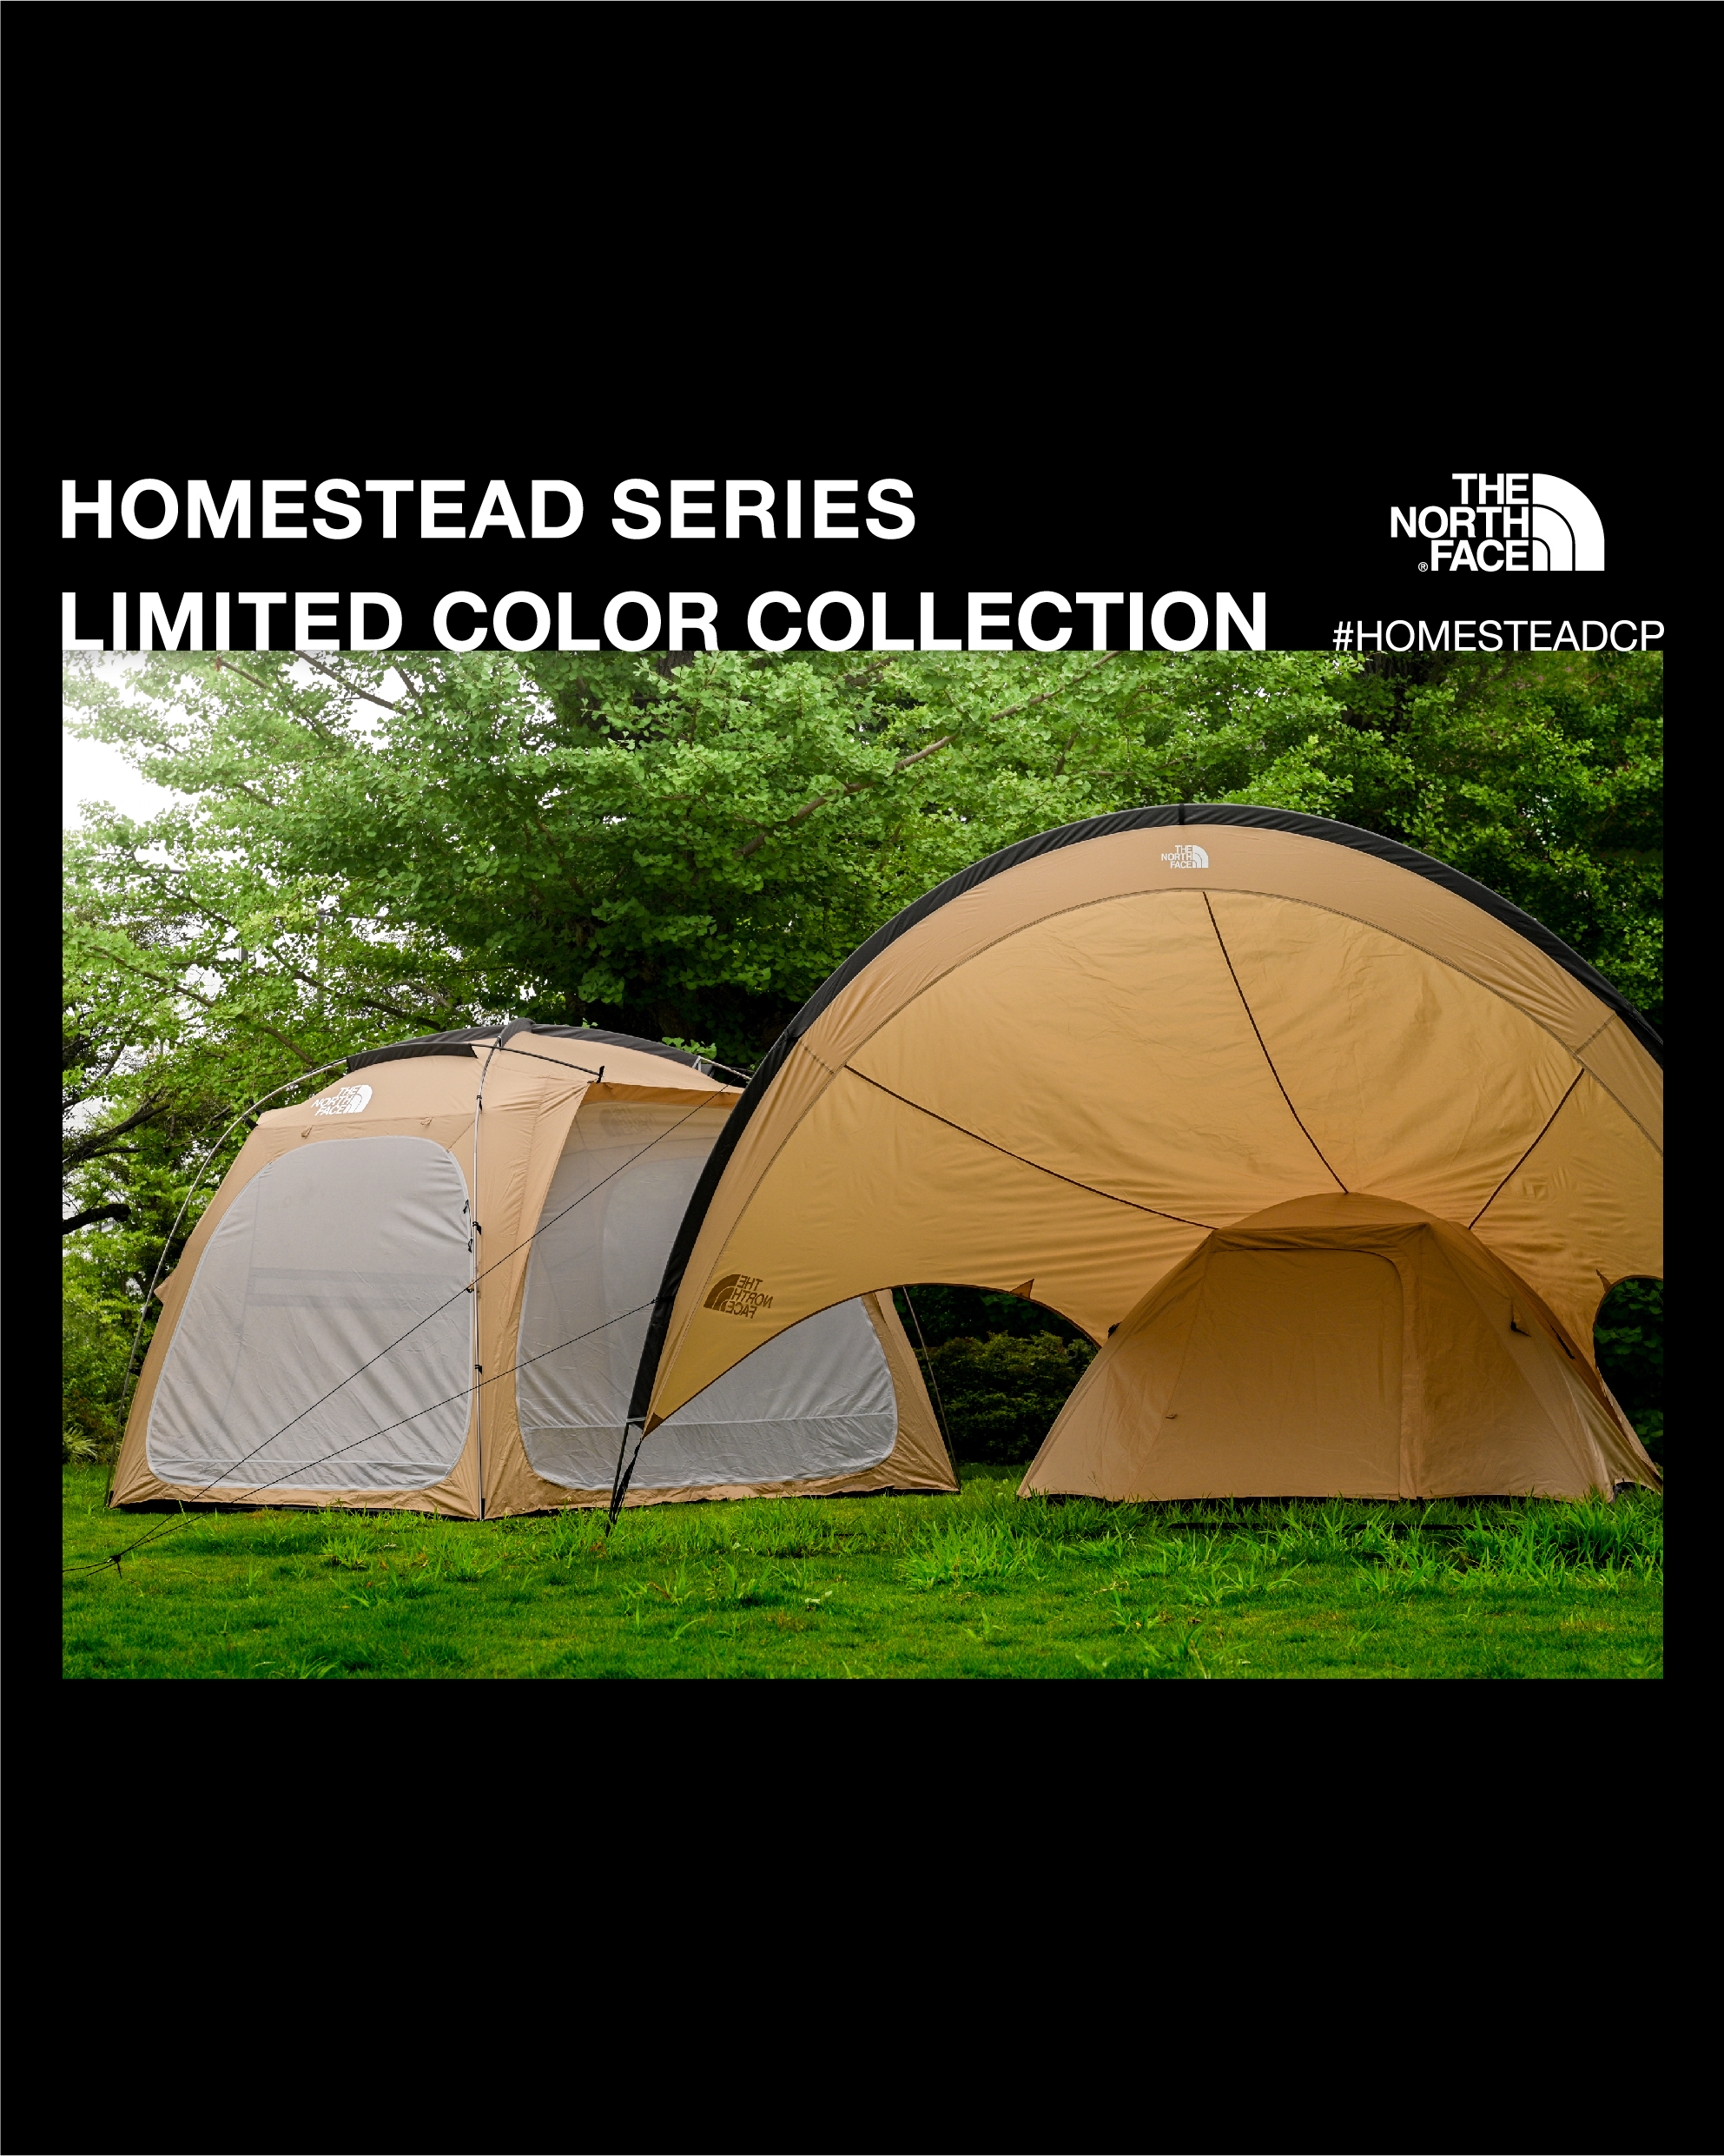 THE NORTH FACE HOMESTEAD SERIES - LIMITED COLOR COLLECTION 